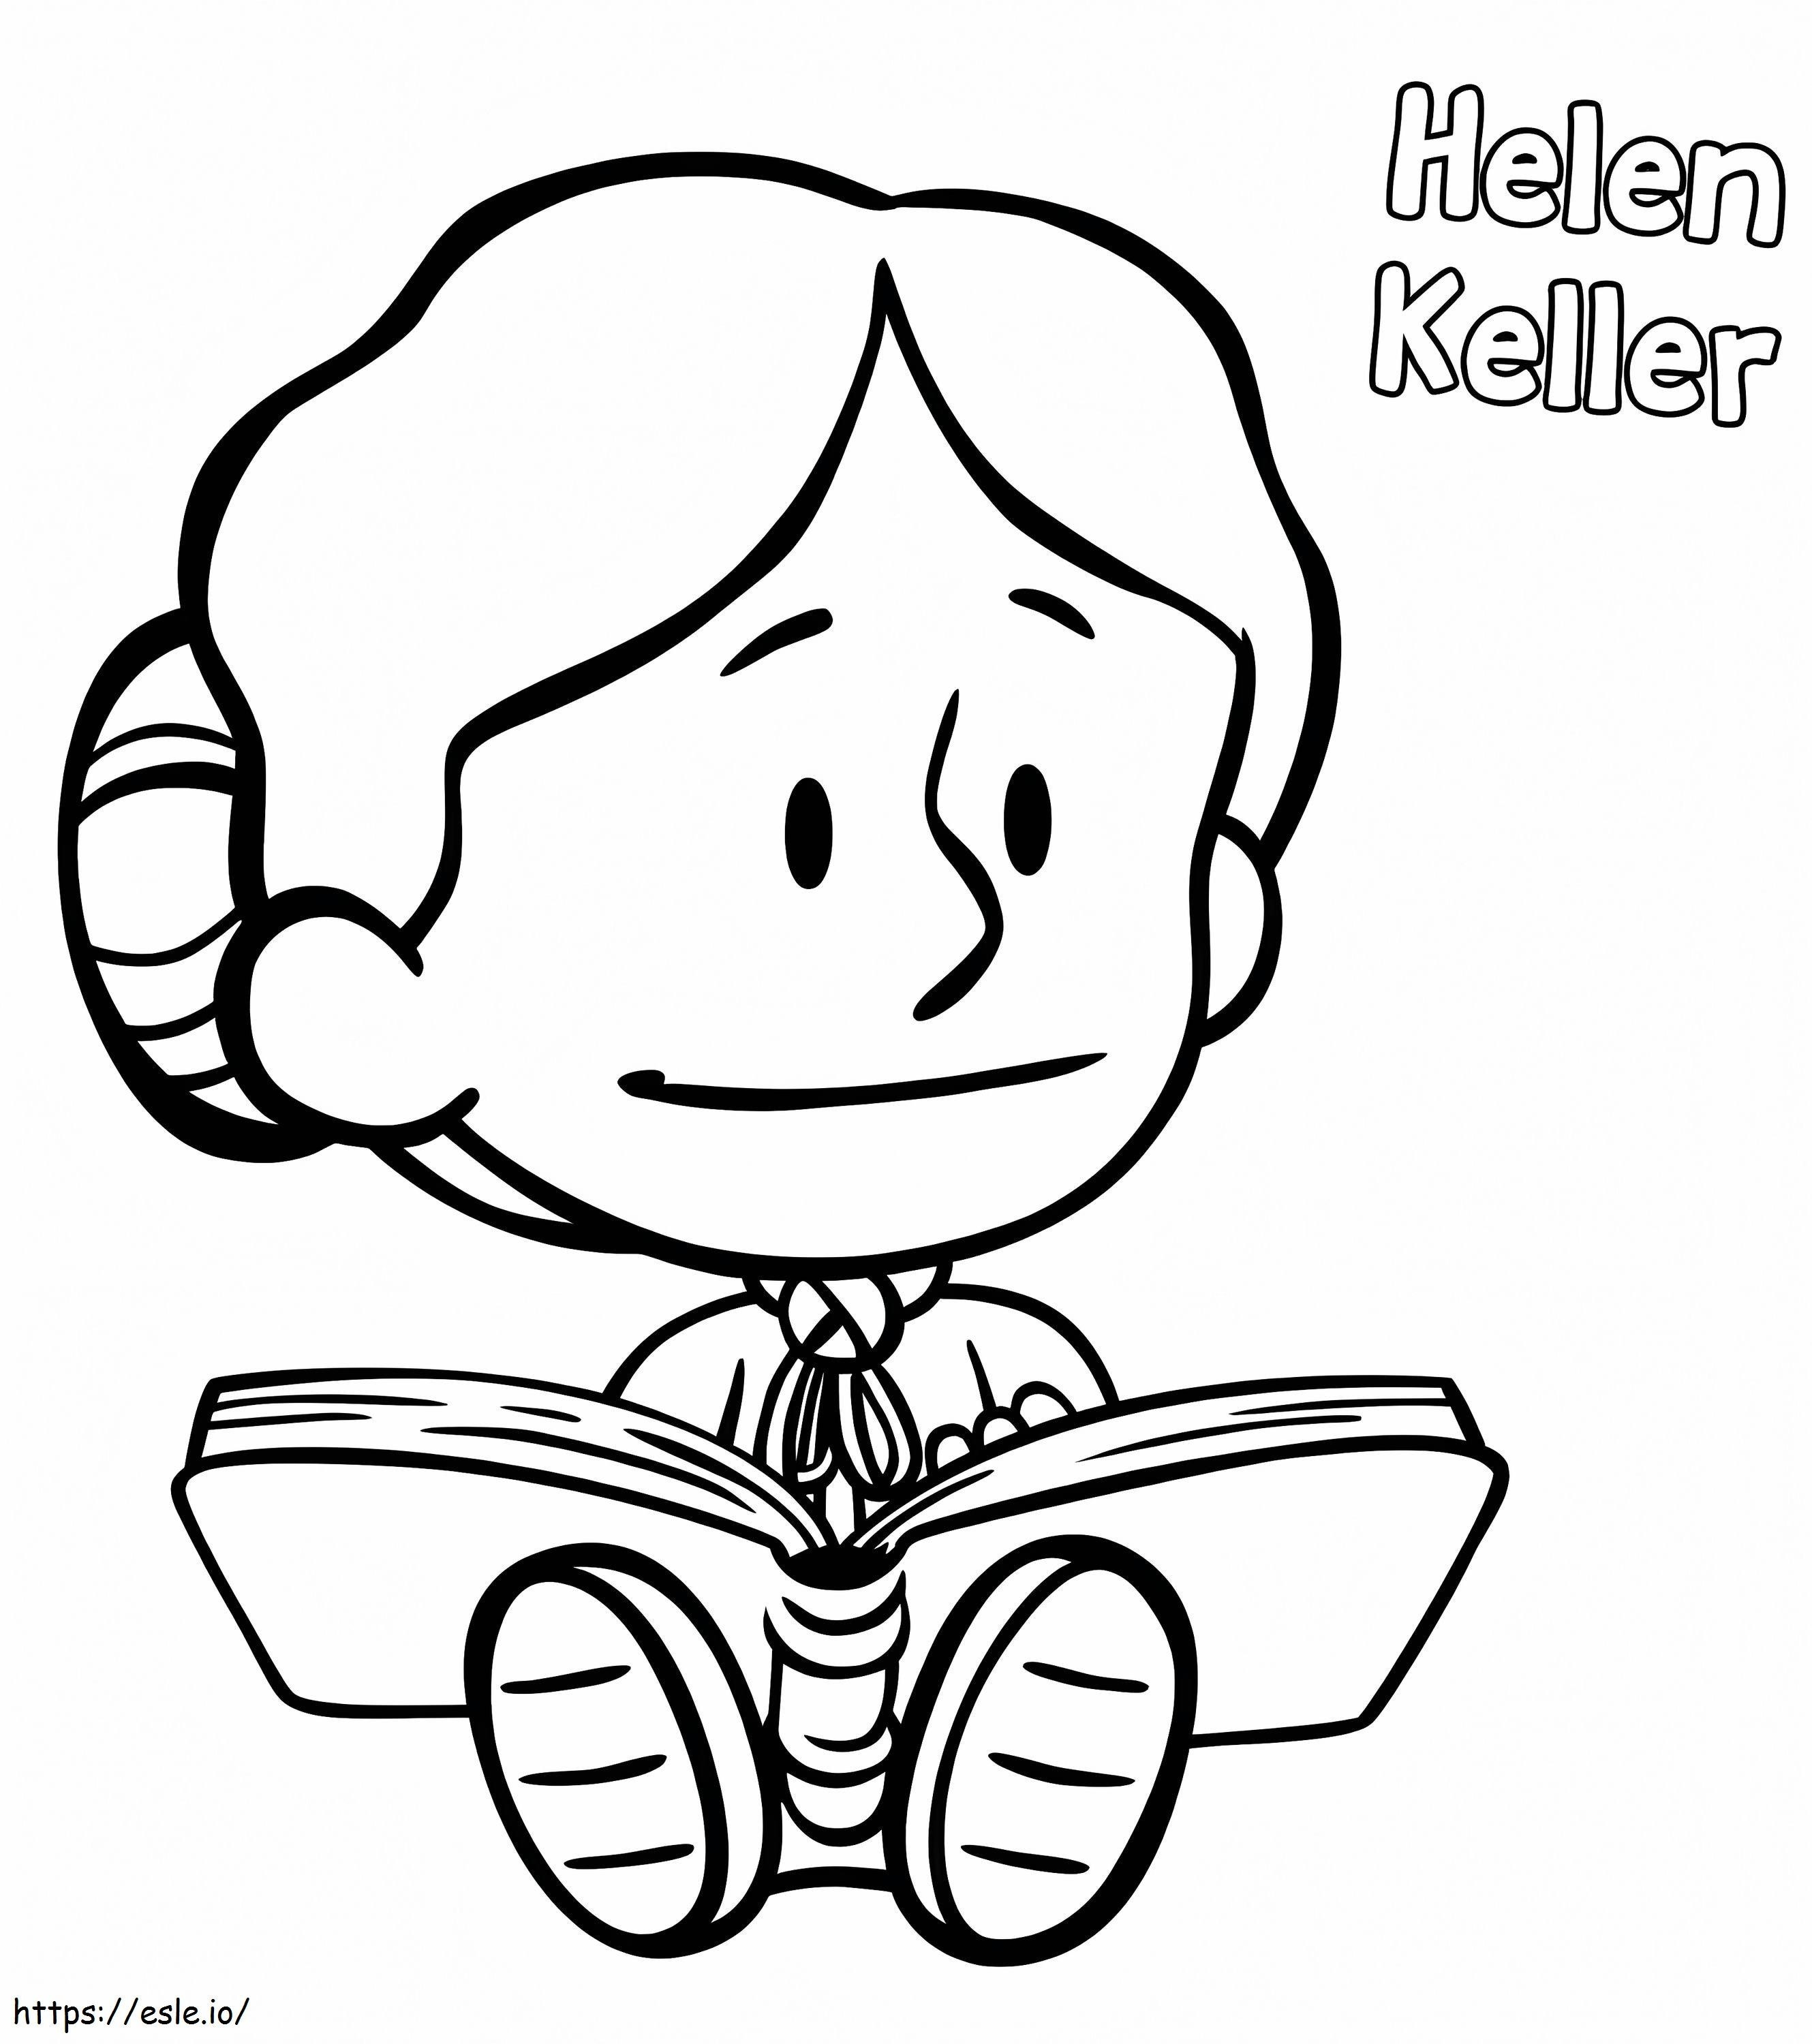 Helen Keller From Xavier Riddle coloring page